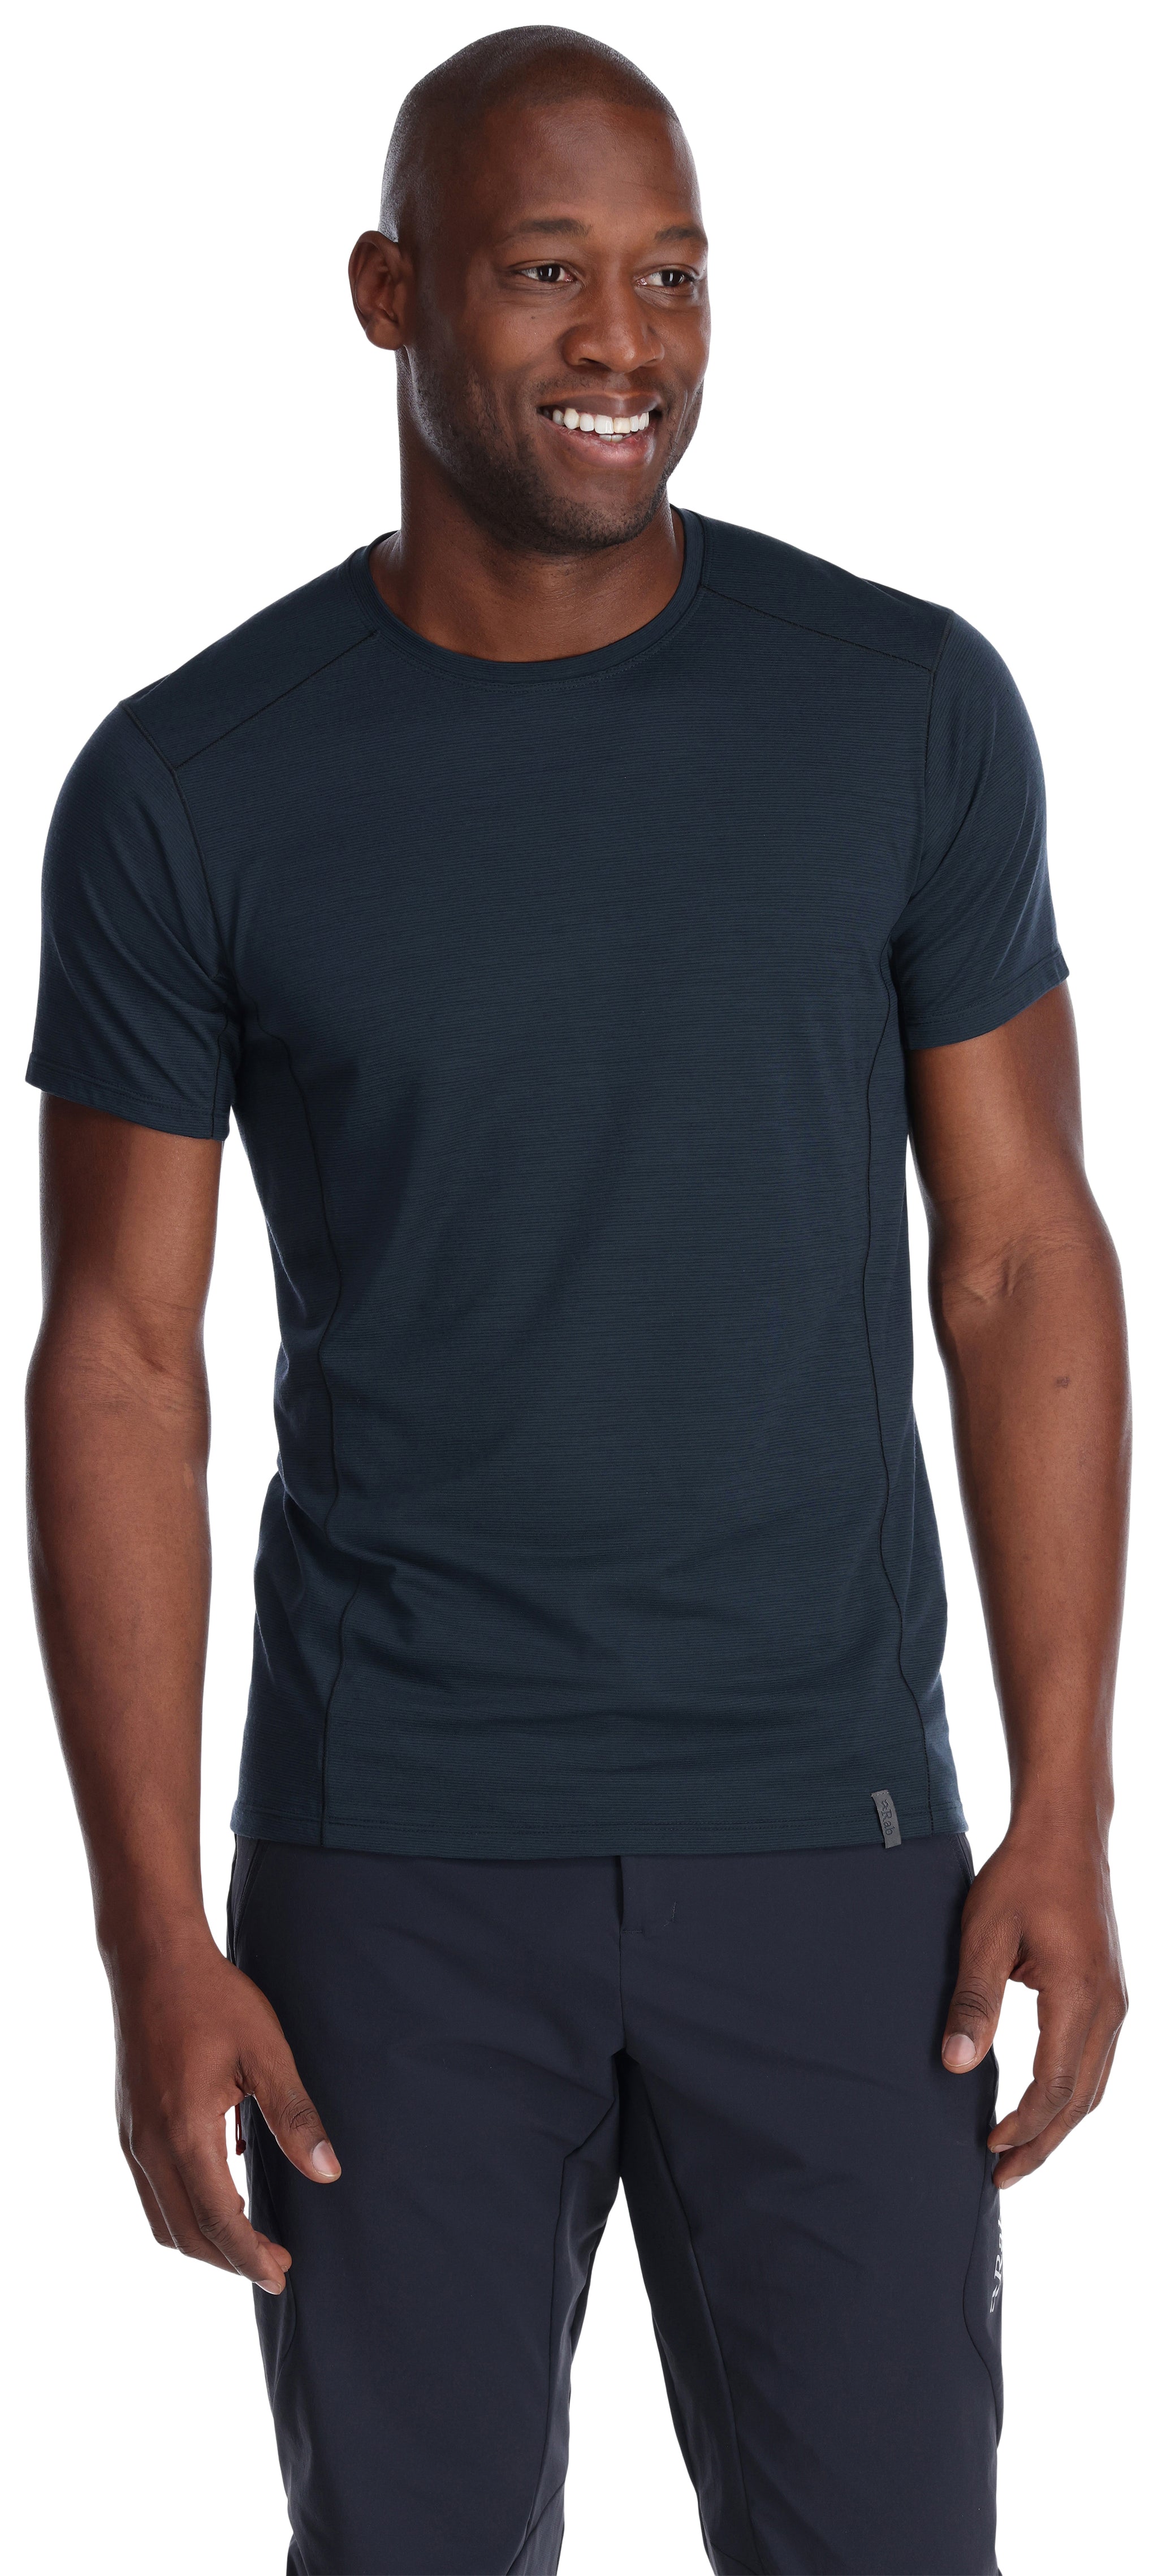 Rab Men's Syncrino Base Tee - Outfitters Store